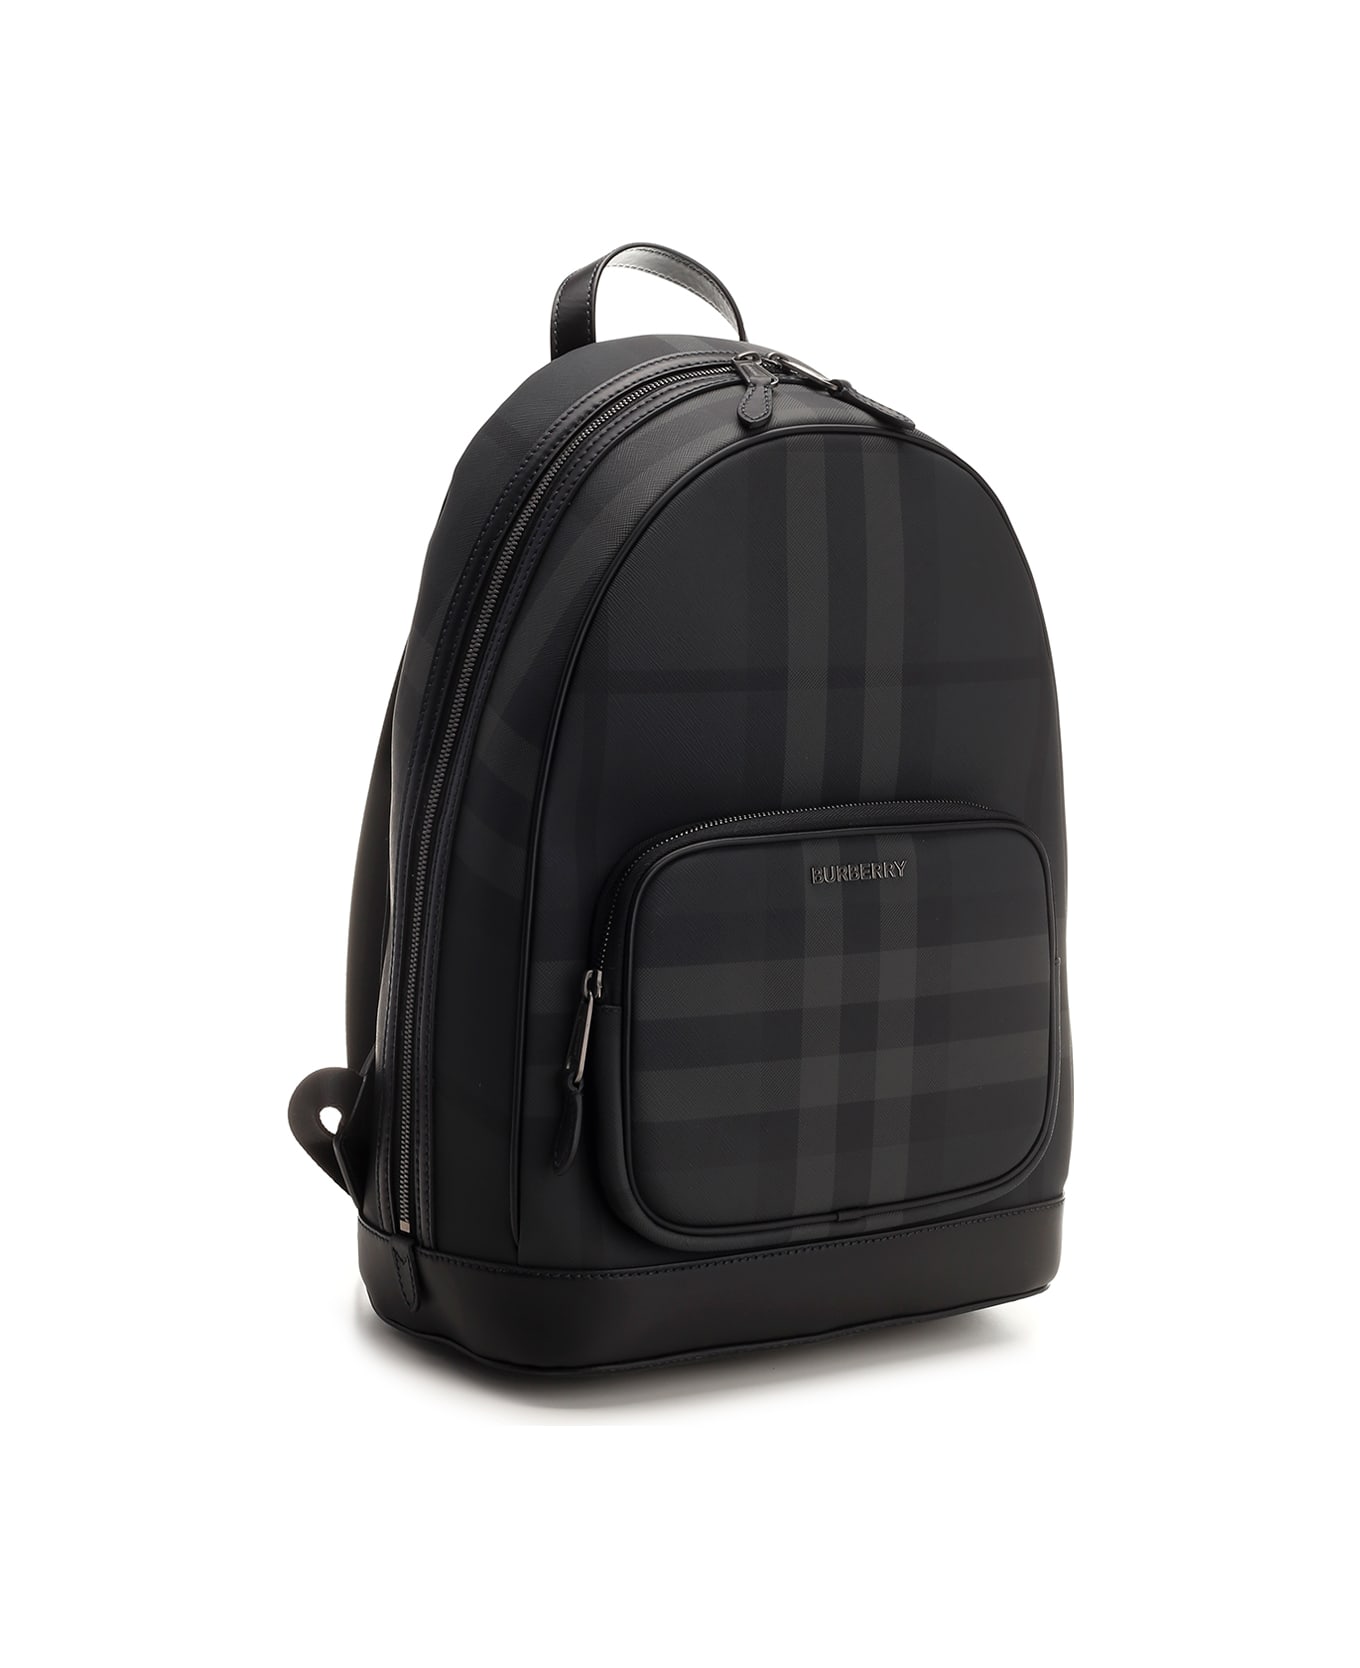 Burberry Check Backpack - Grey